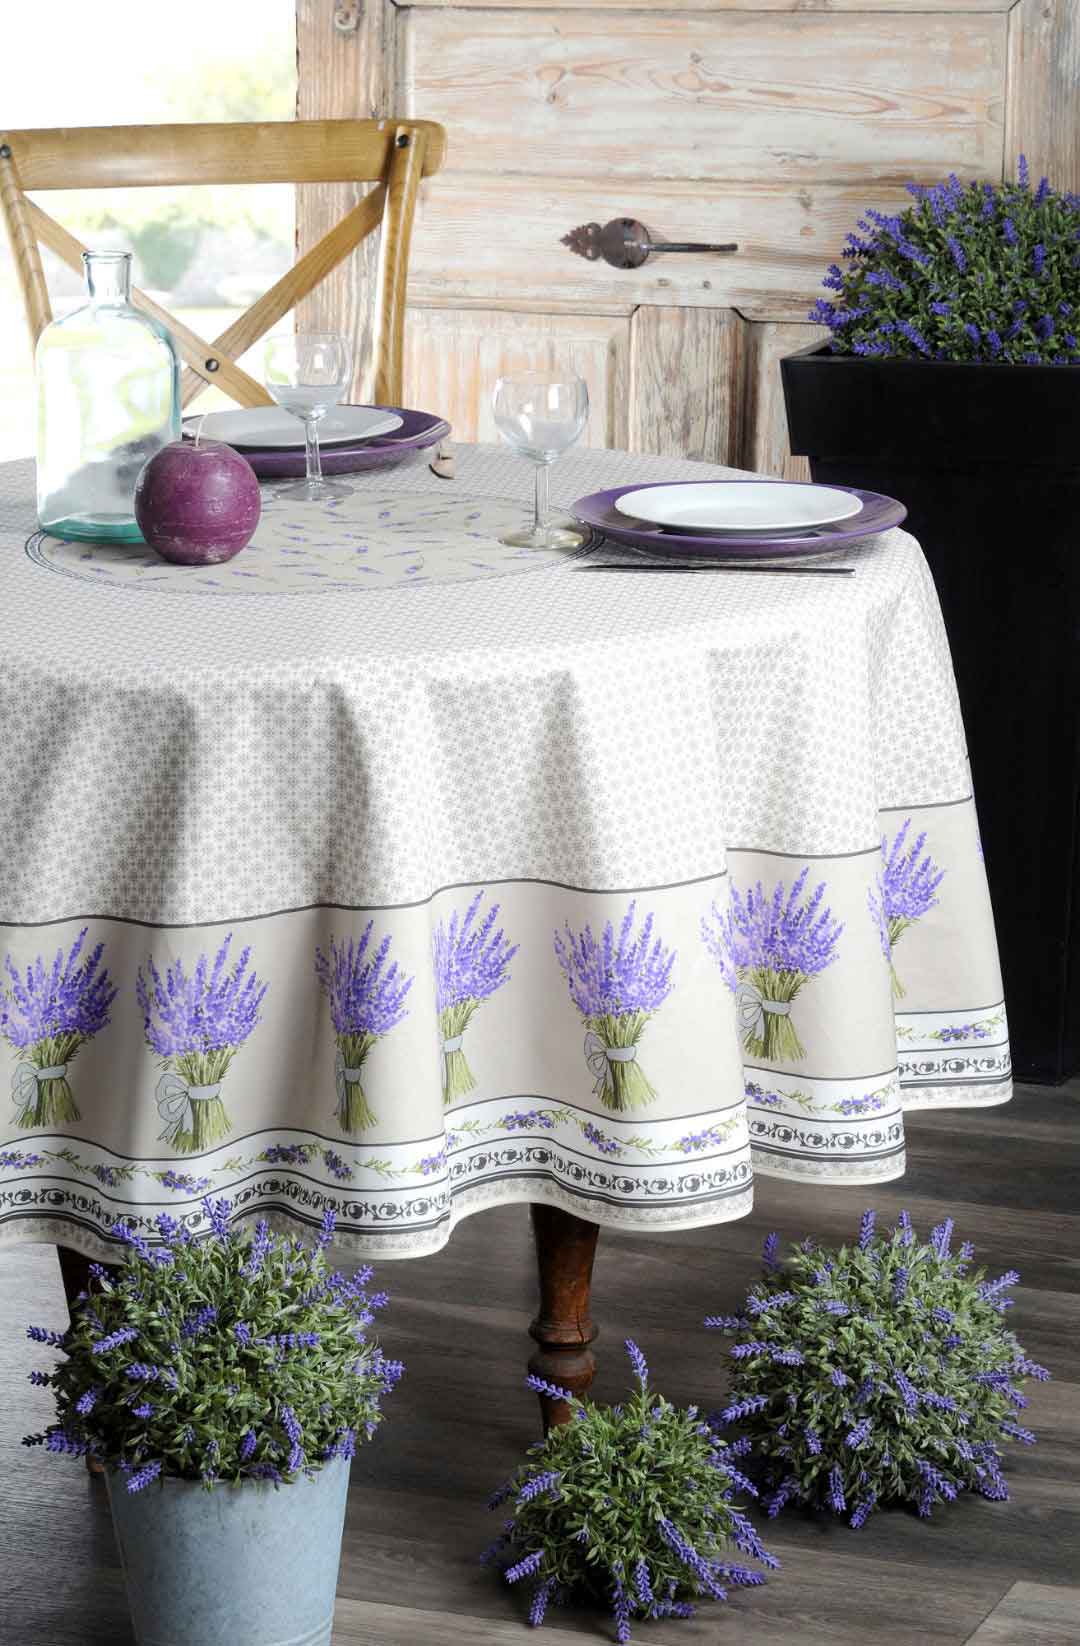 90 Round Tablecloths Yardage Measuring Method You Should Aware Of | Table Covers Depot